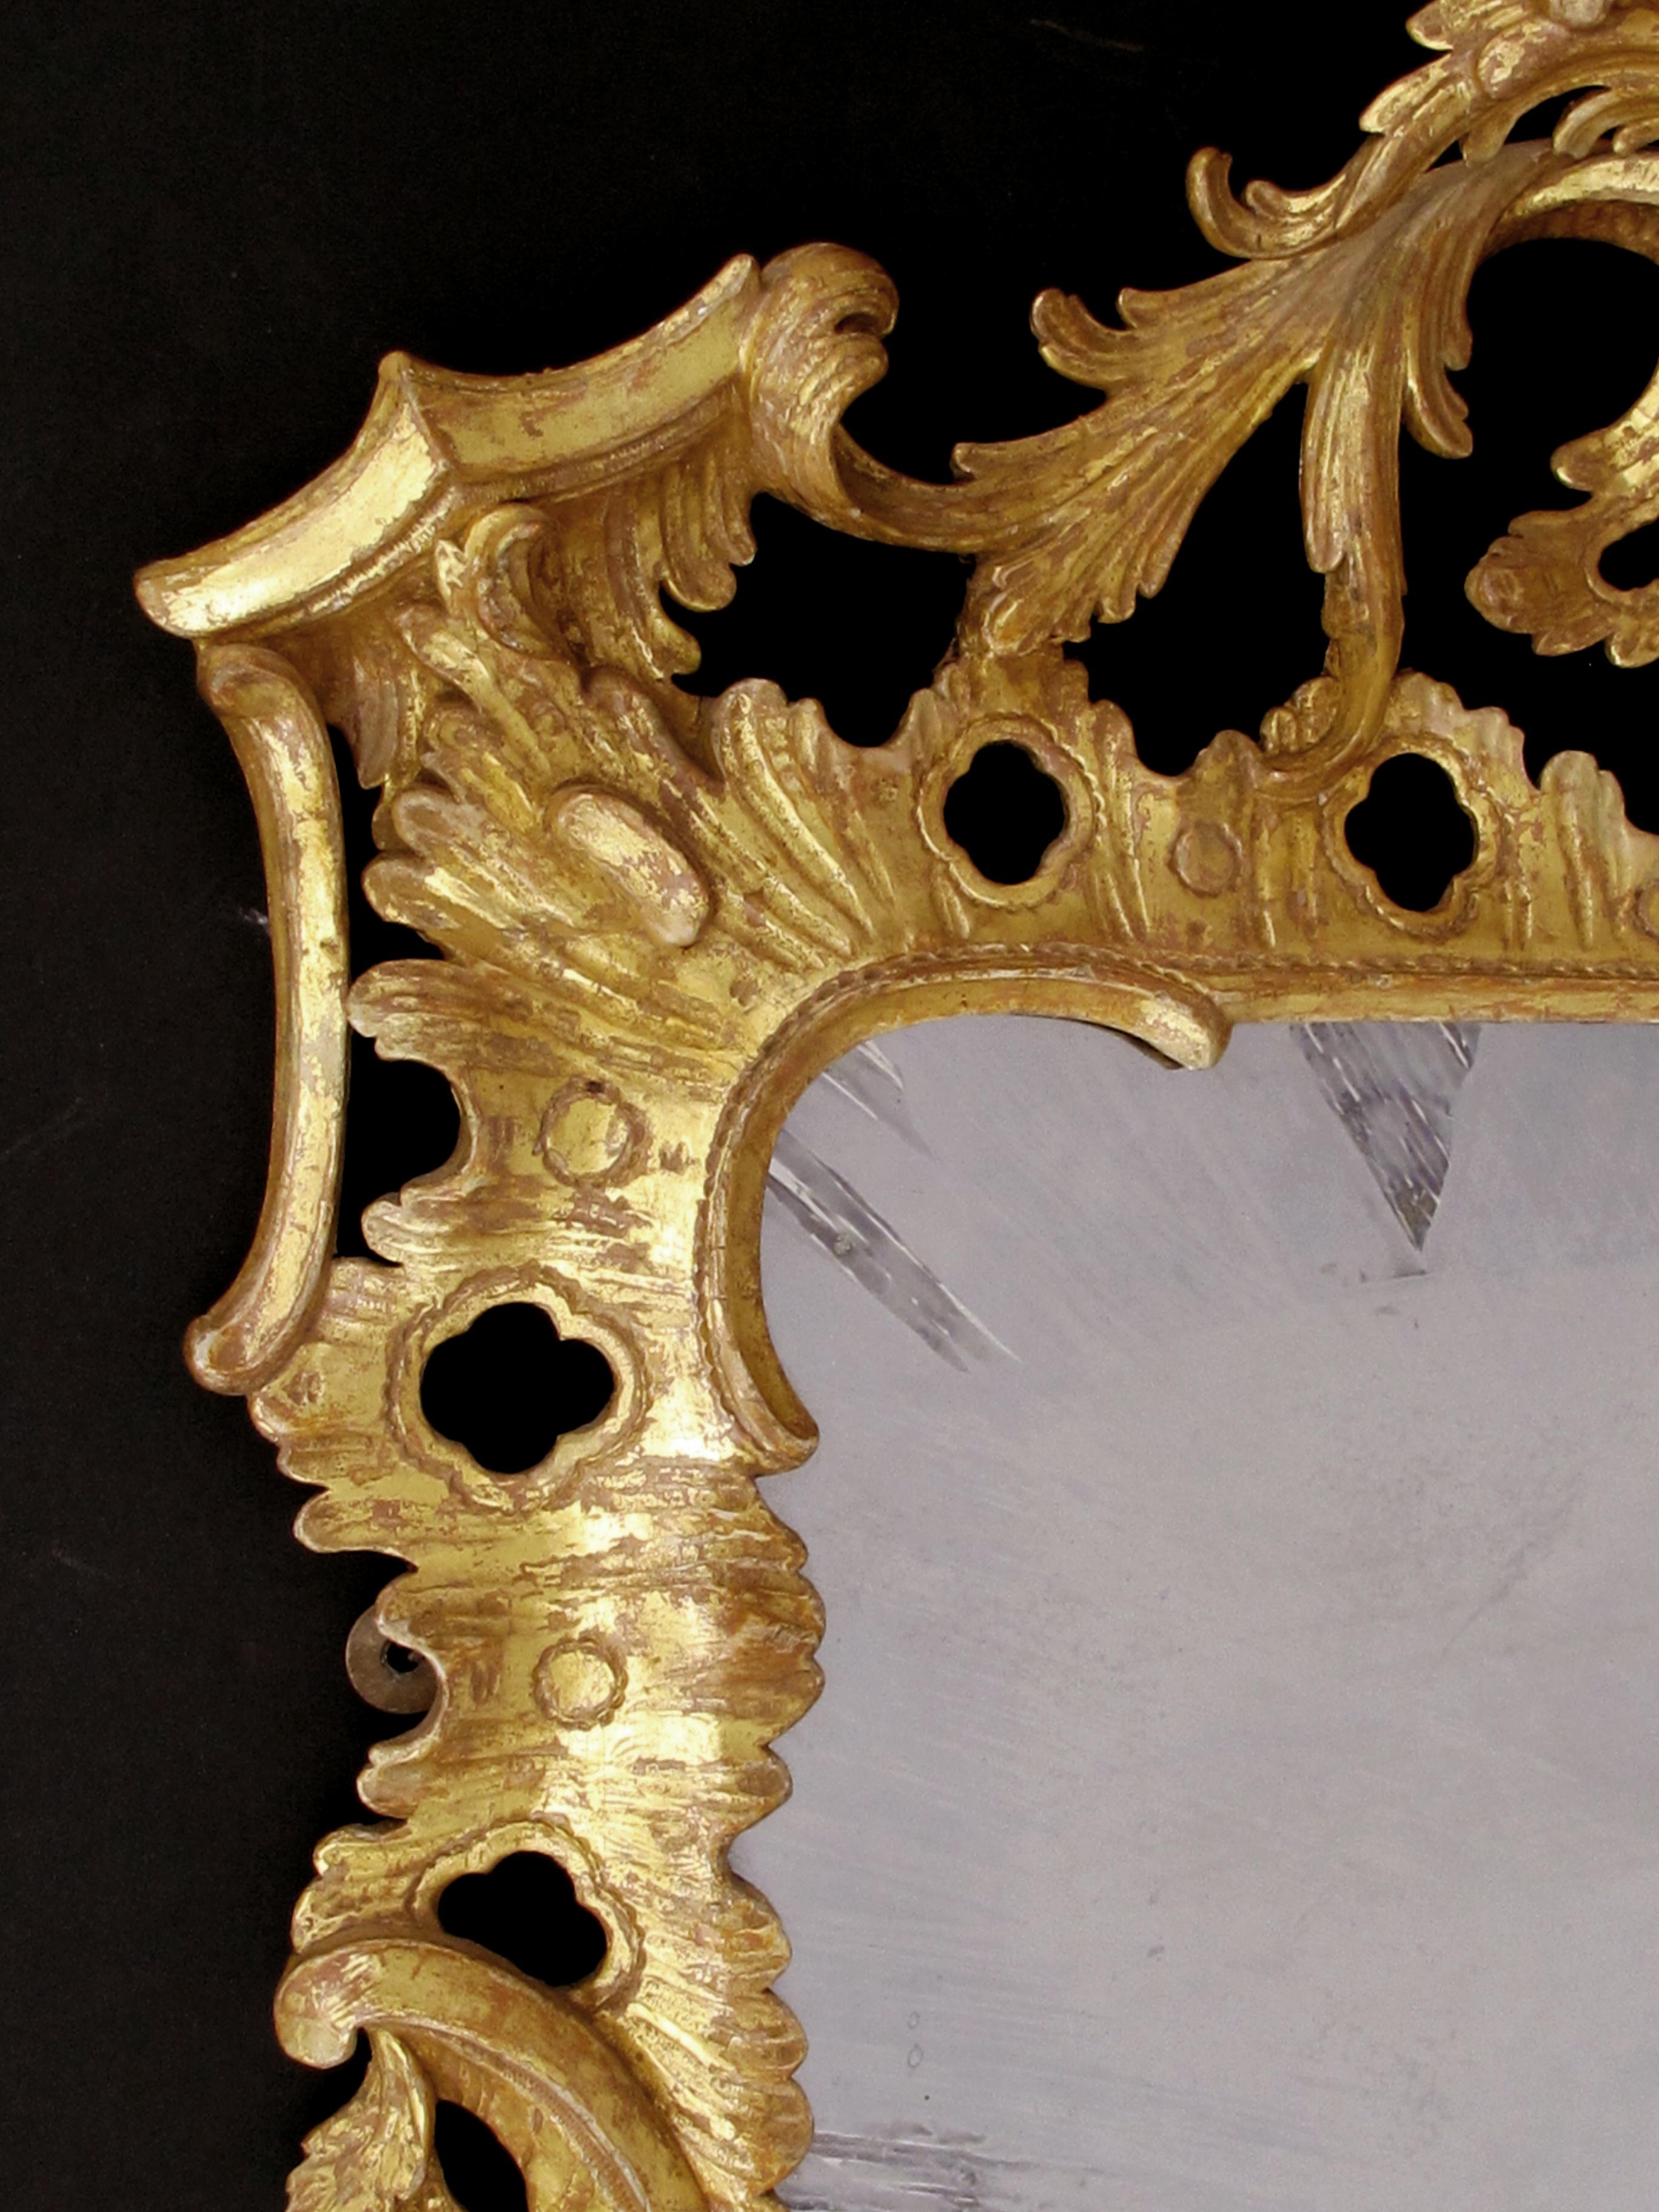 18th Century Superbly-Carved English George II Giltwood Mirror with Elaborate Foliate Crest